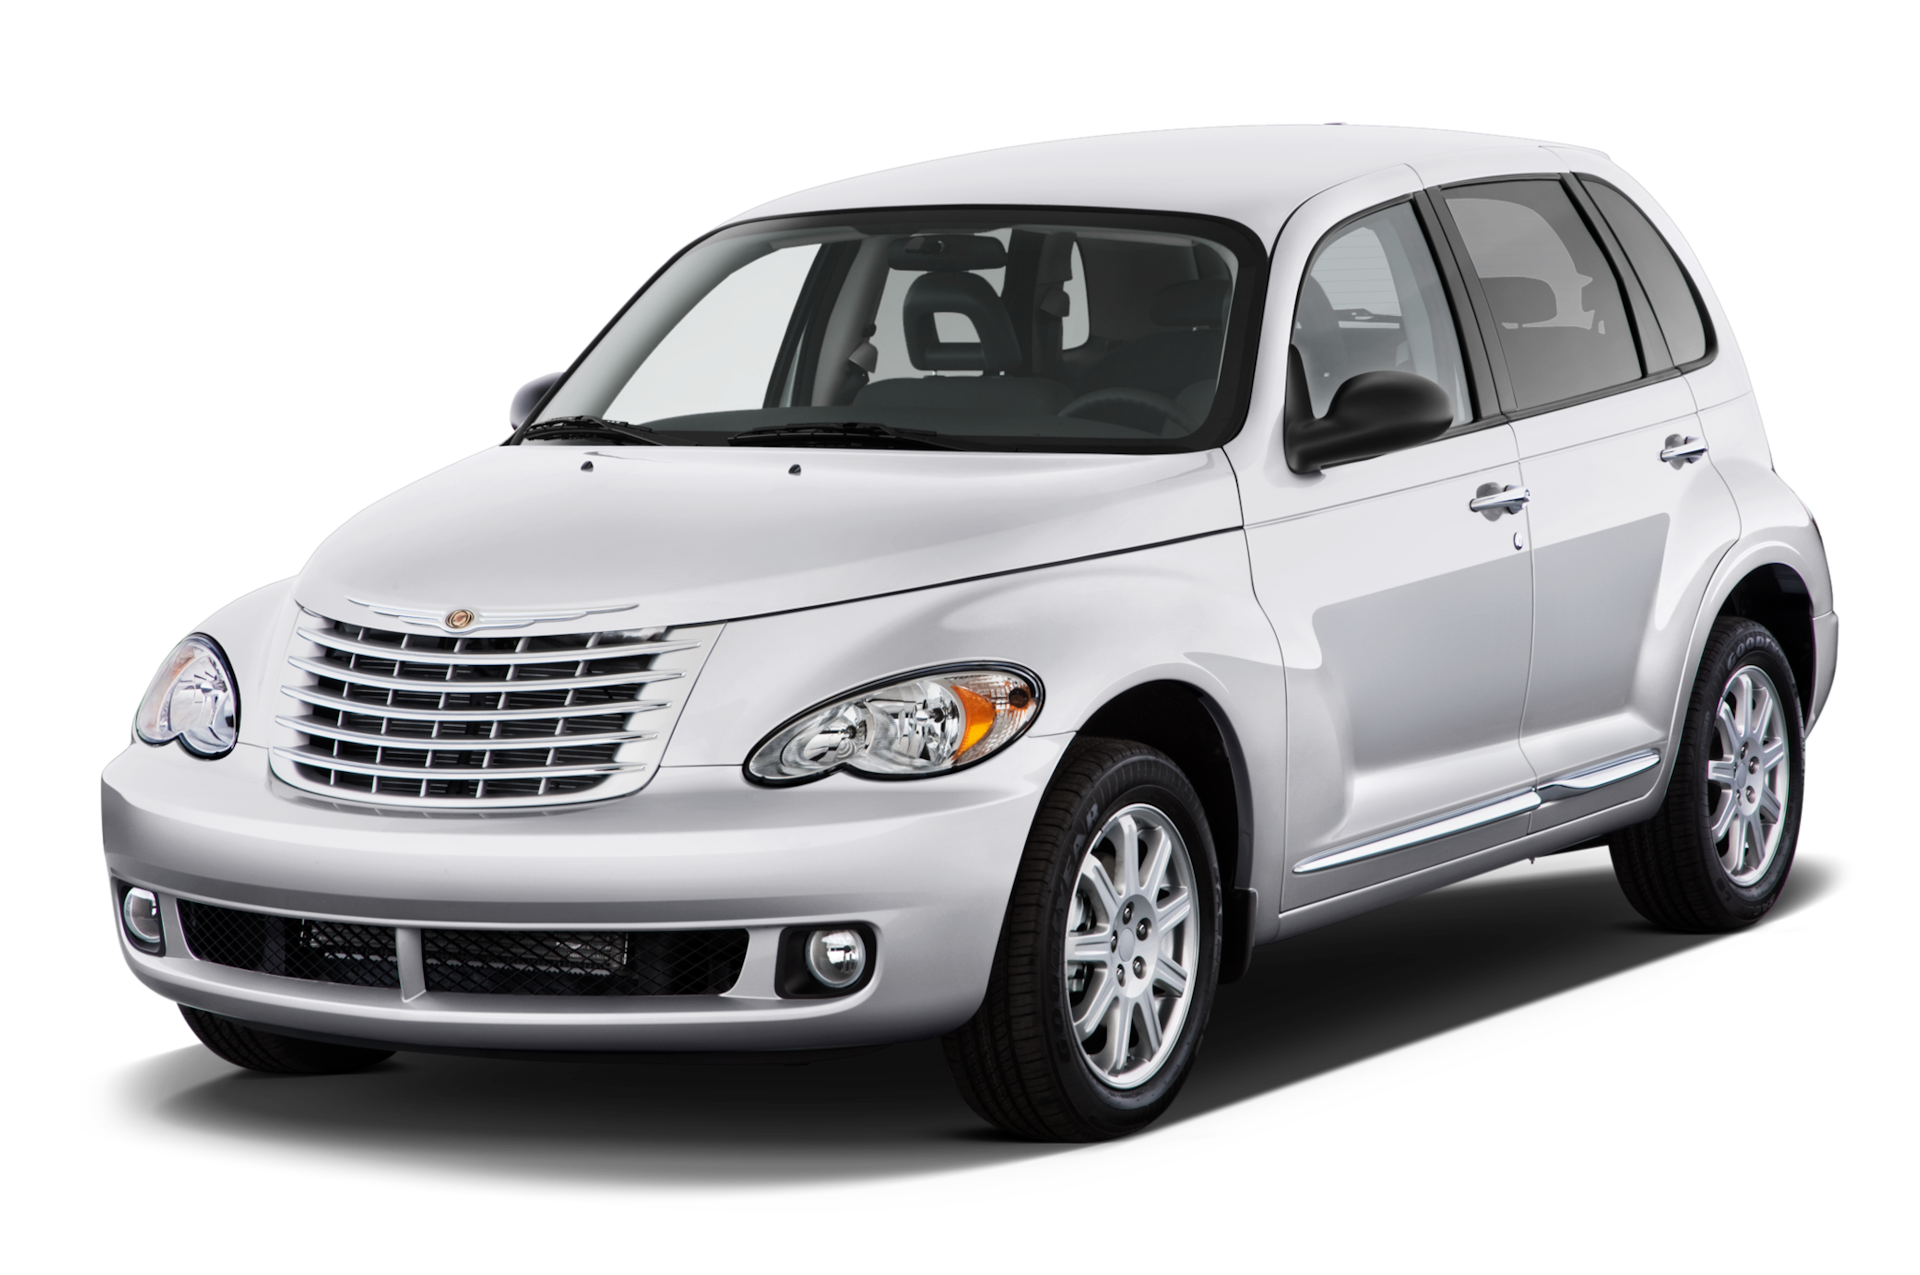 2010 Chrysler PT Cruiser Prices, Reviews, and Photos - MotorTrend